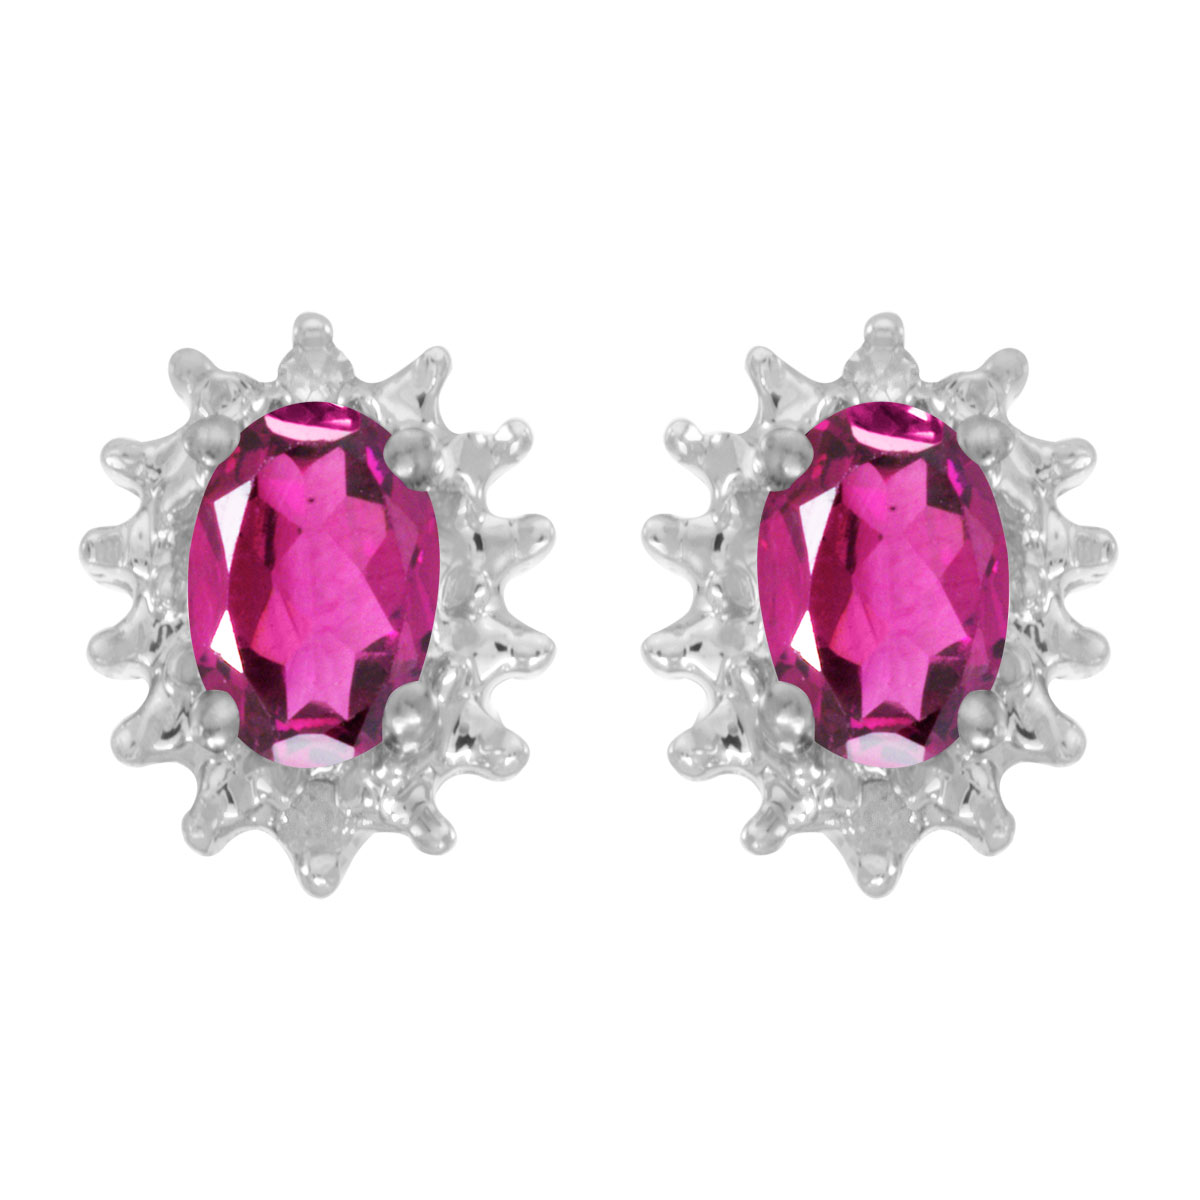 These 14k white gold oval pink topaz and diamond earrings feature 6x4 mm genuine natural pink topazs with a 0.86 ct total weight and .04 ct diamonds.